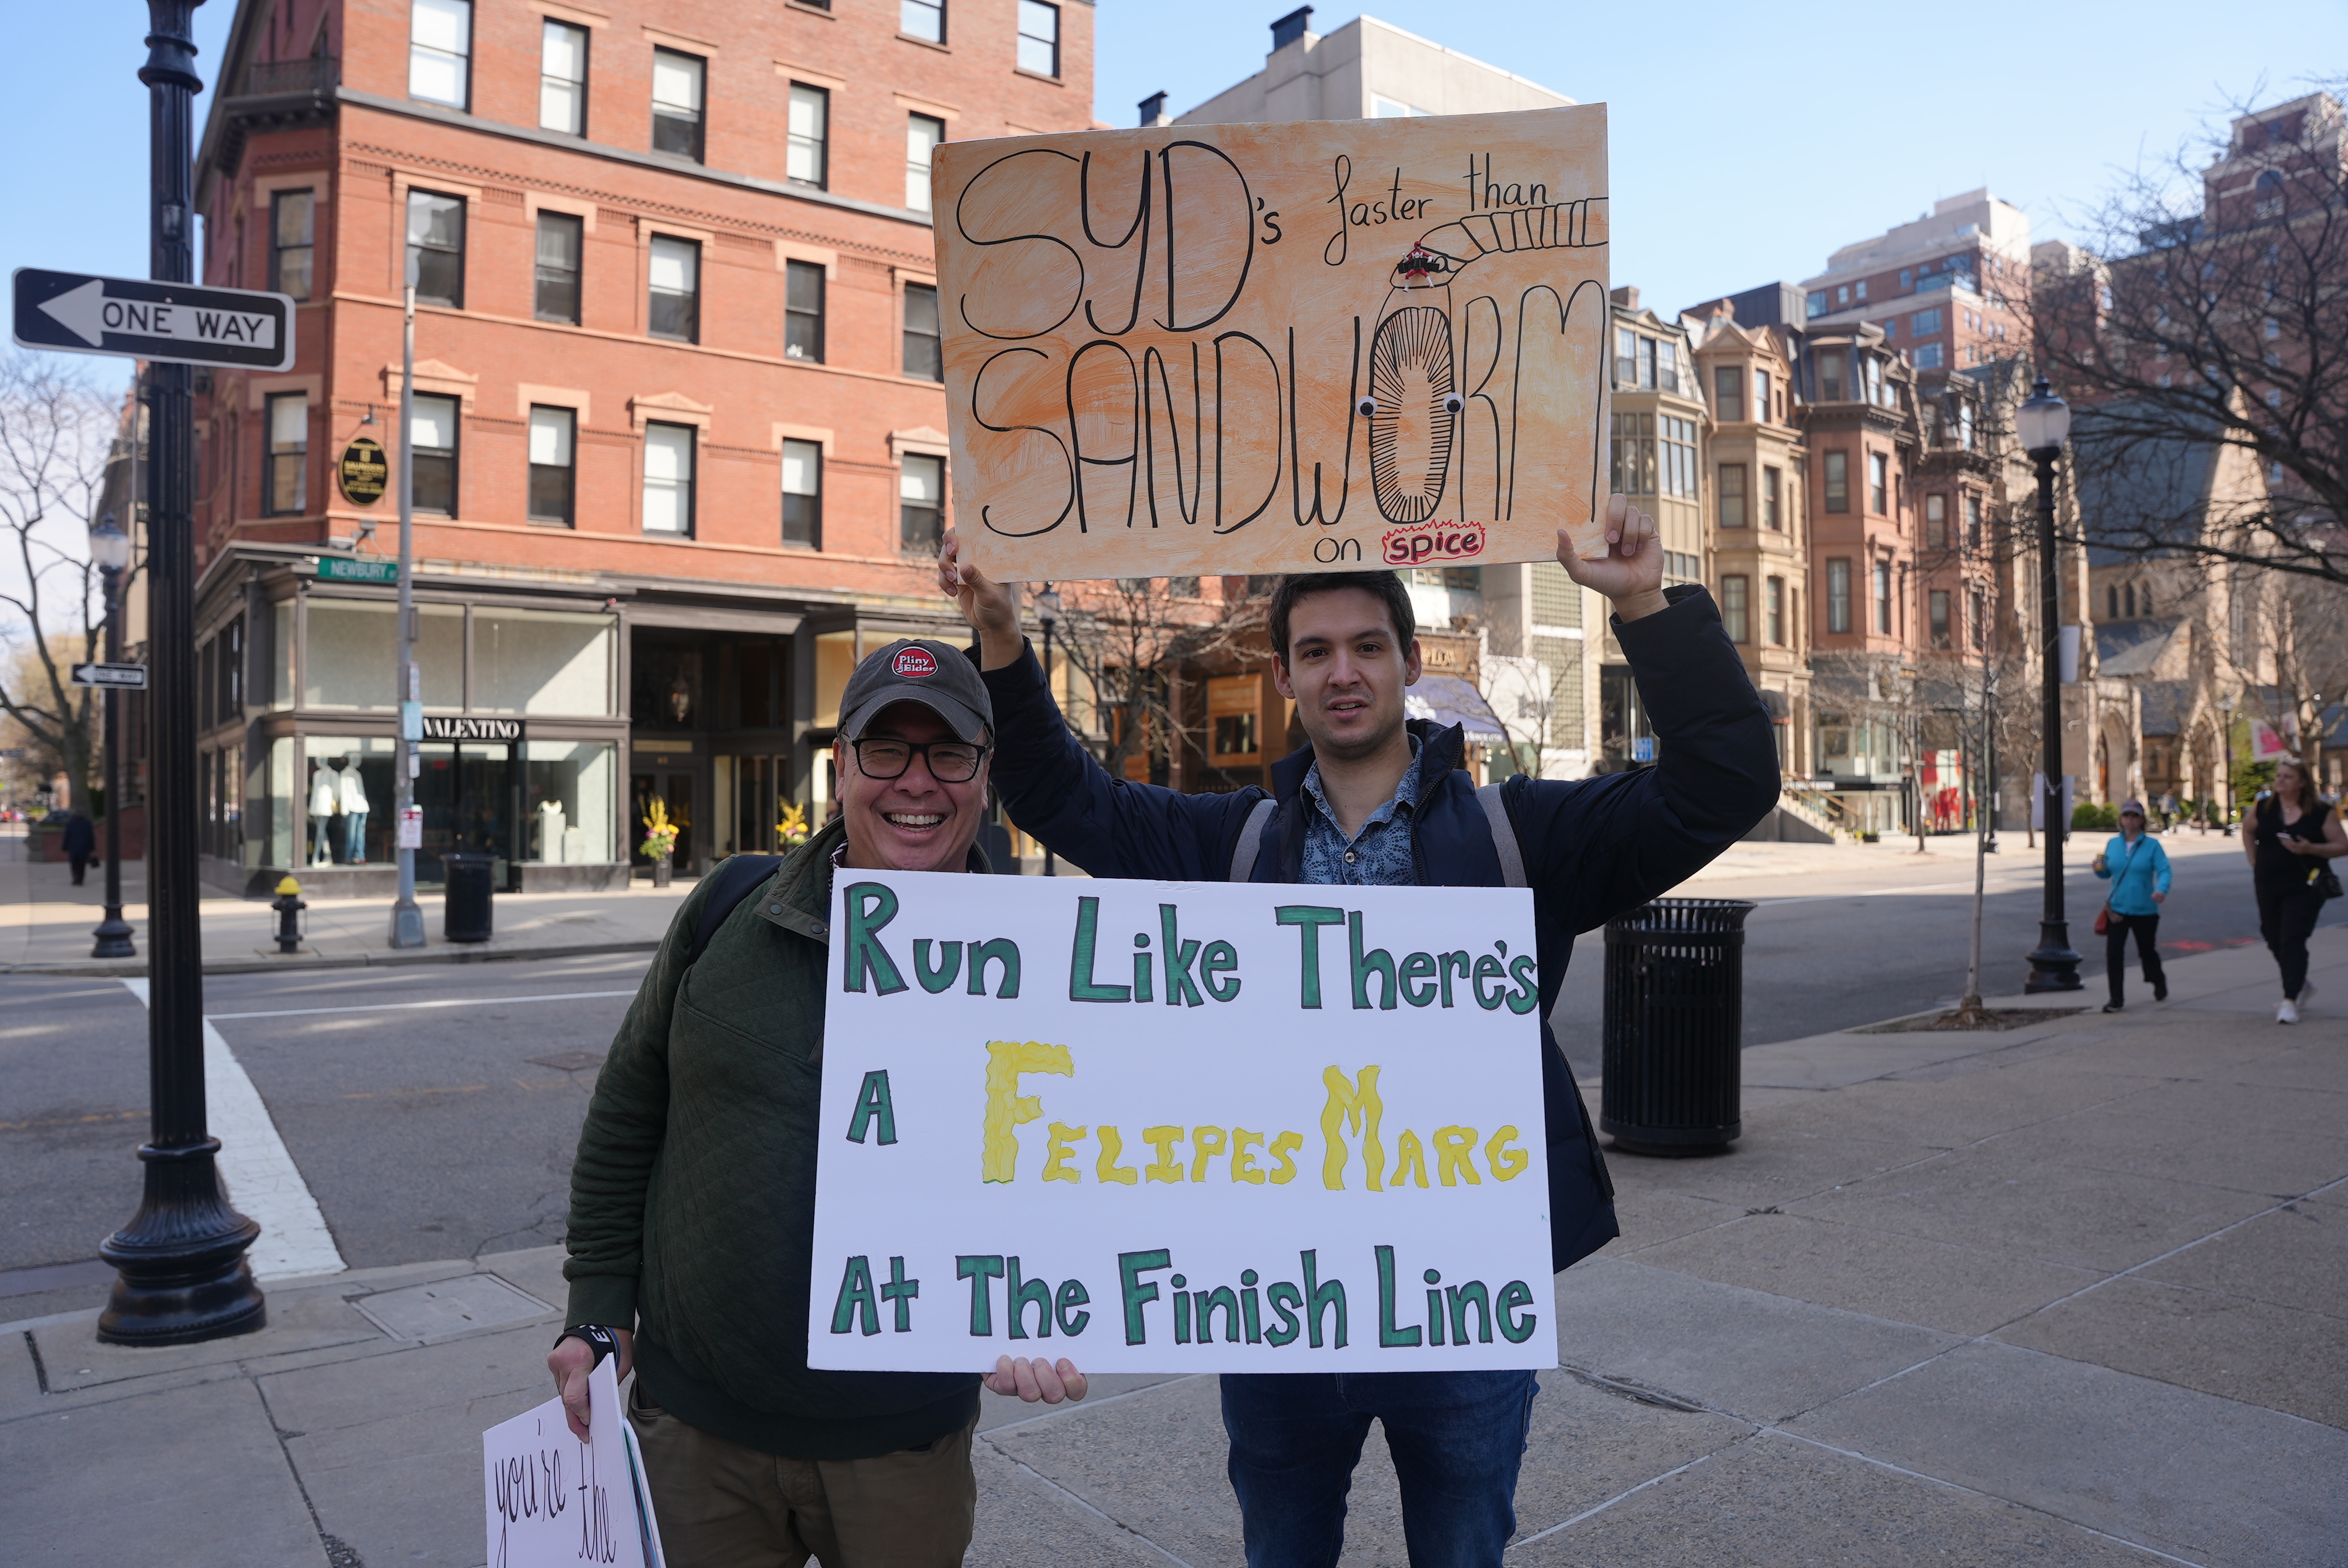 Brad Lew, left, and his daughter's boyfriend hold signs supporting the woman, who was running the Boston Marathon on Monday, April 15, 2024. One says, "Run like there's a Felipe's marg at the finish line," the other says, "Syd's faster than a sandworm on spice."